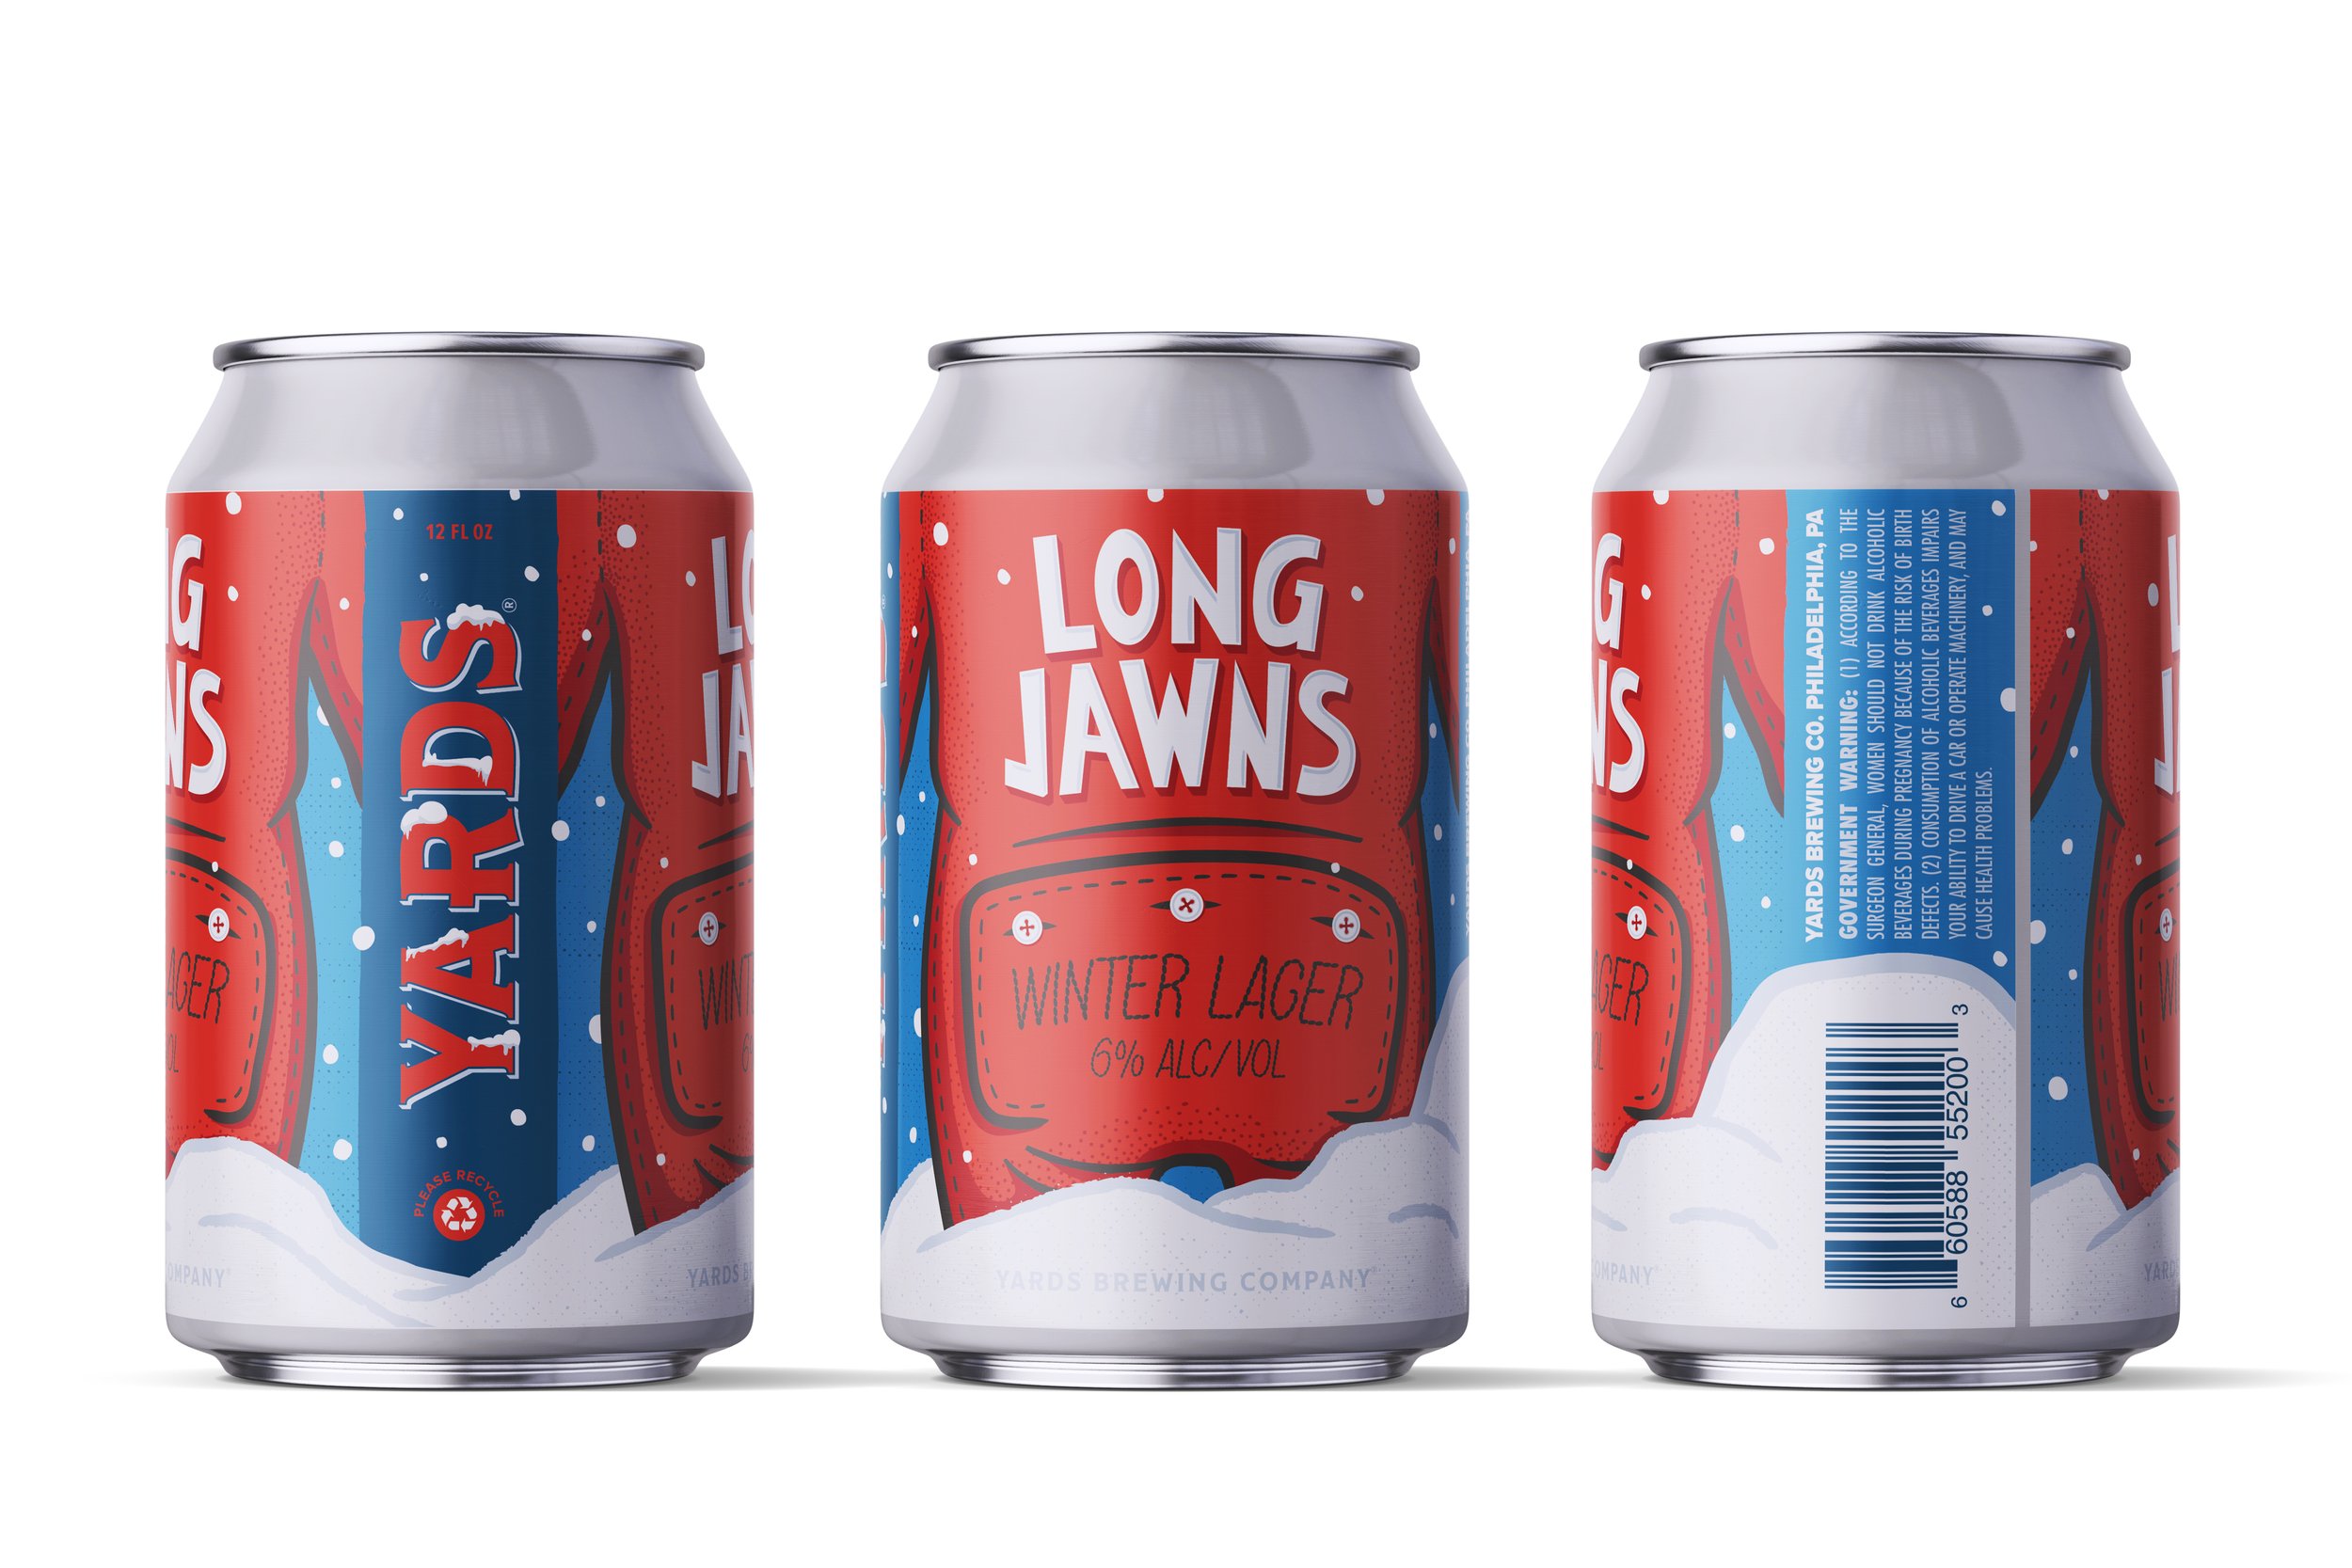 Yards_Long_Jawns_Winter_Lager_12oz_can_White_background copy.jpg